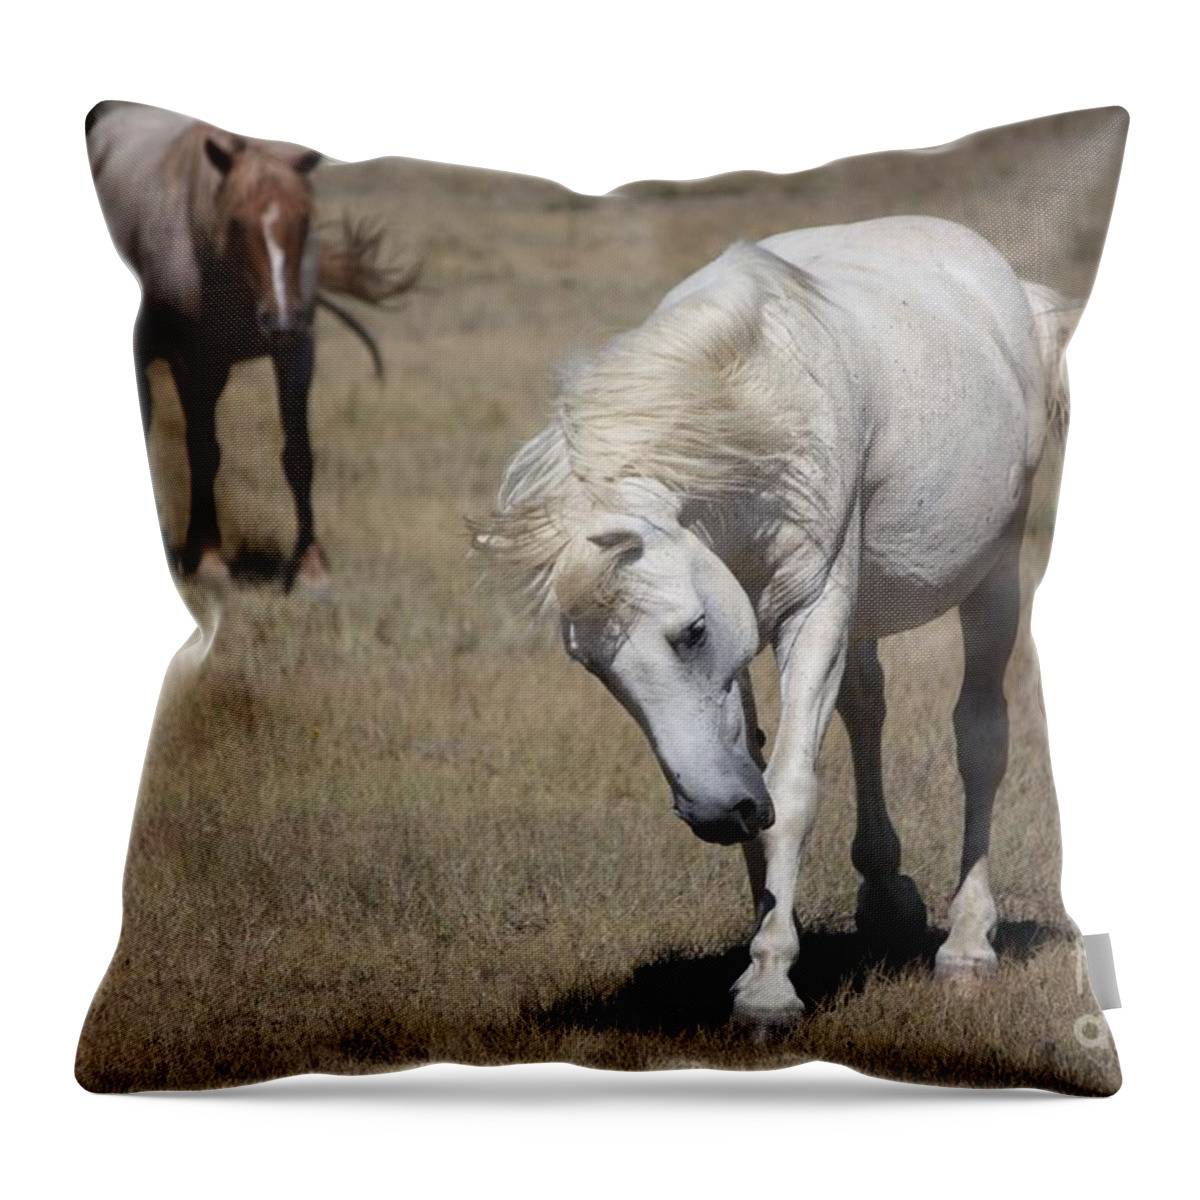 Horses Throw Pillow featuring the photograph Wanderer - Monero Mustangs Sanctuary by Veronica Batterson